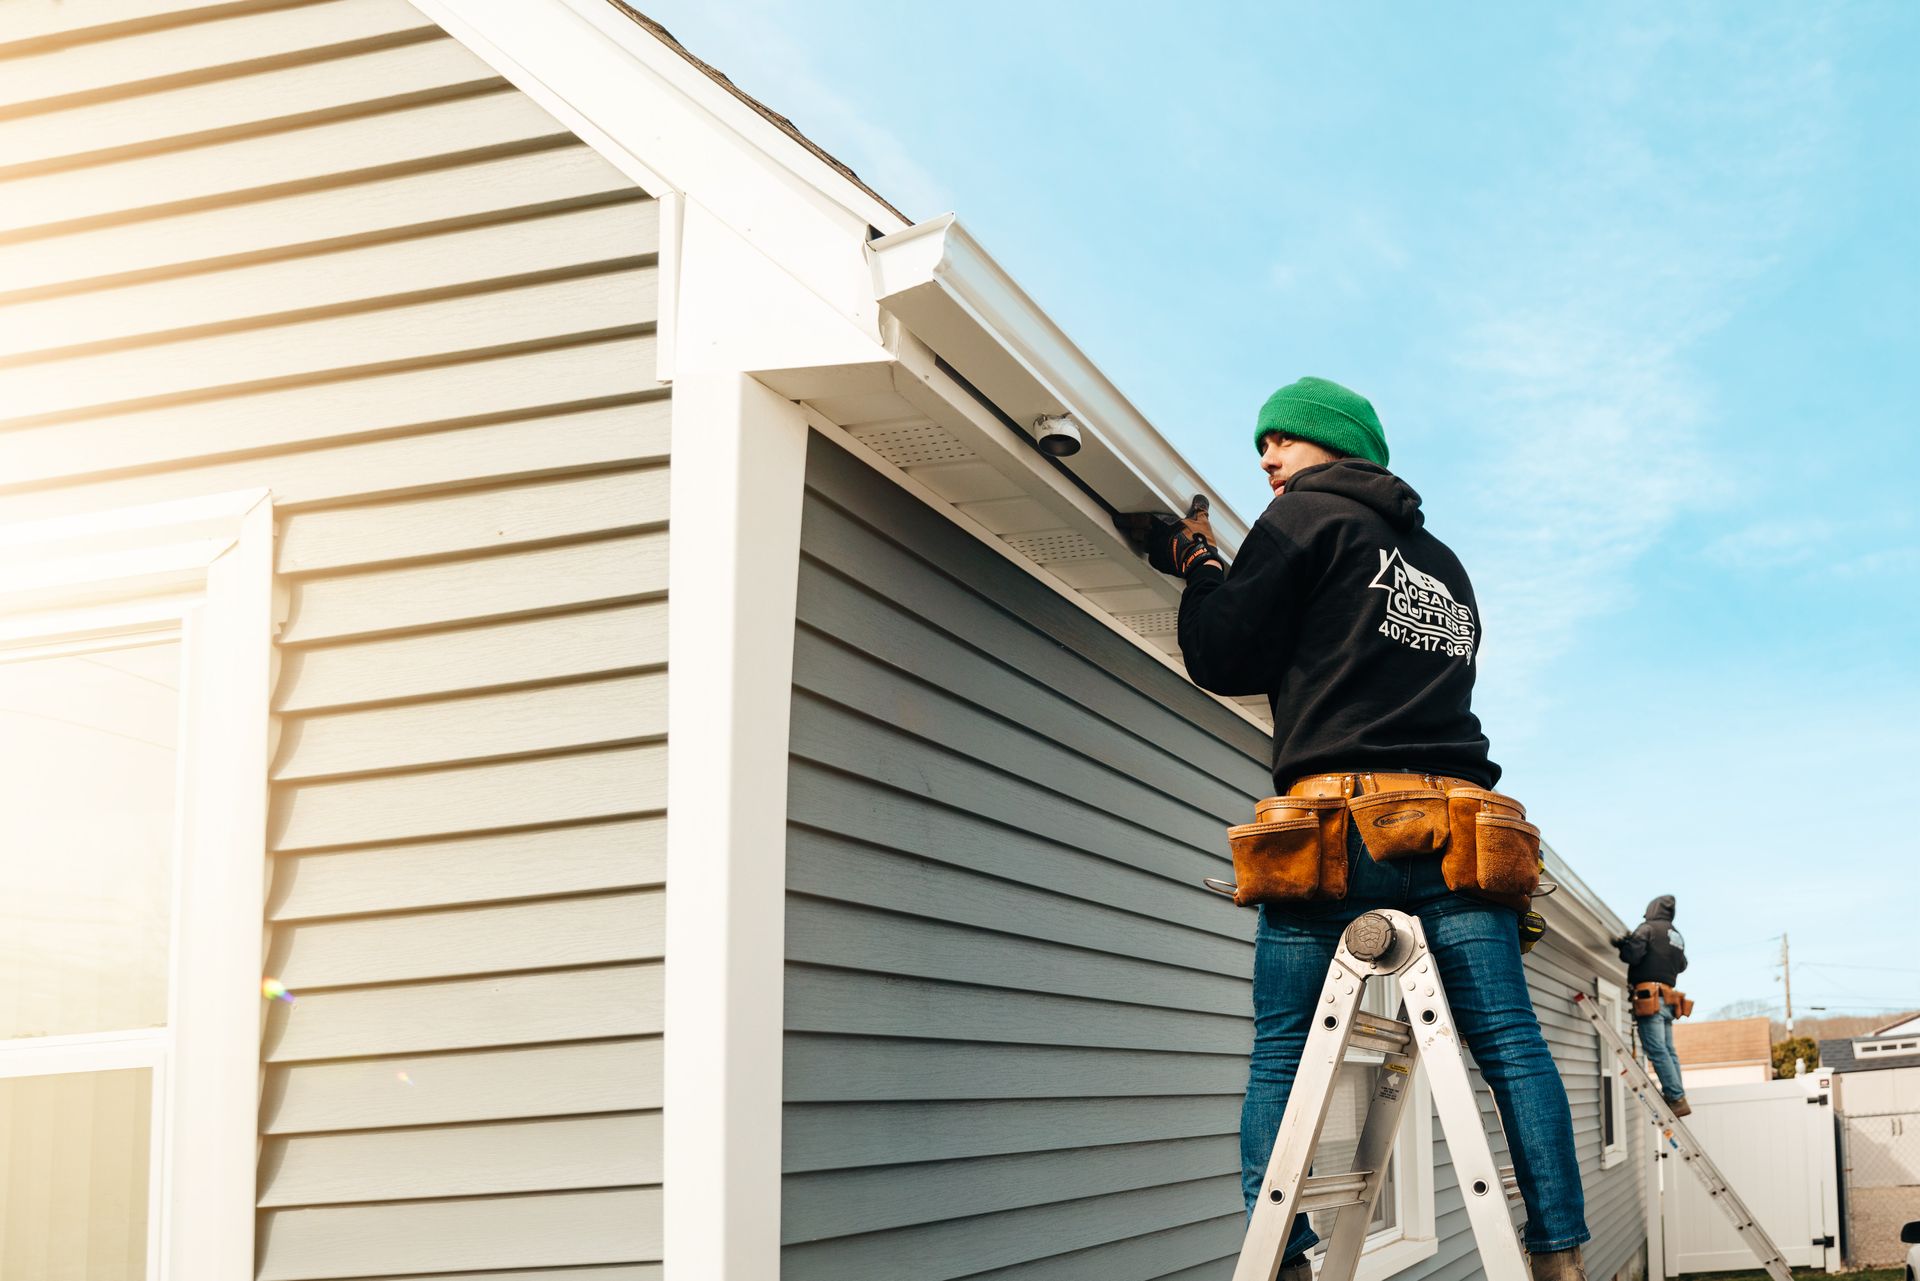 A man is standing on a ladder fixing a gutter on the side of a house.